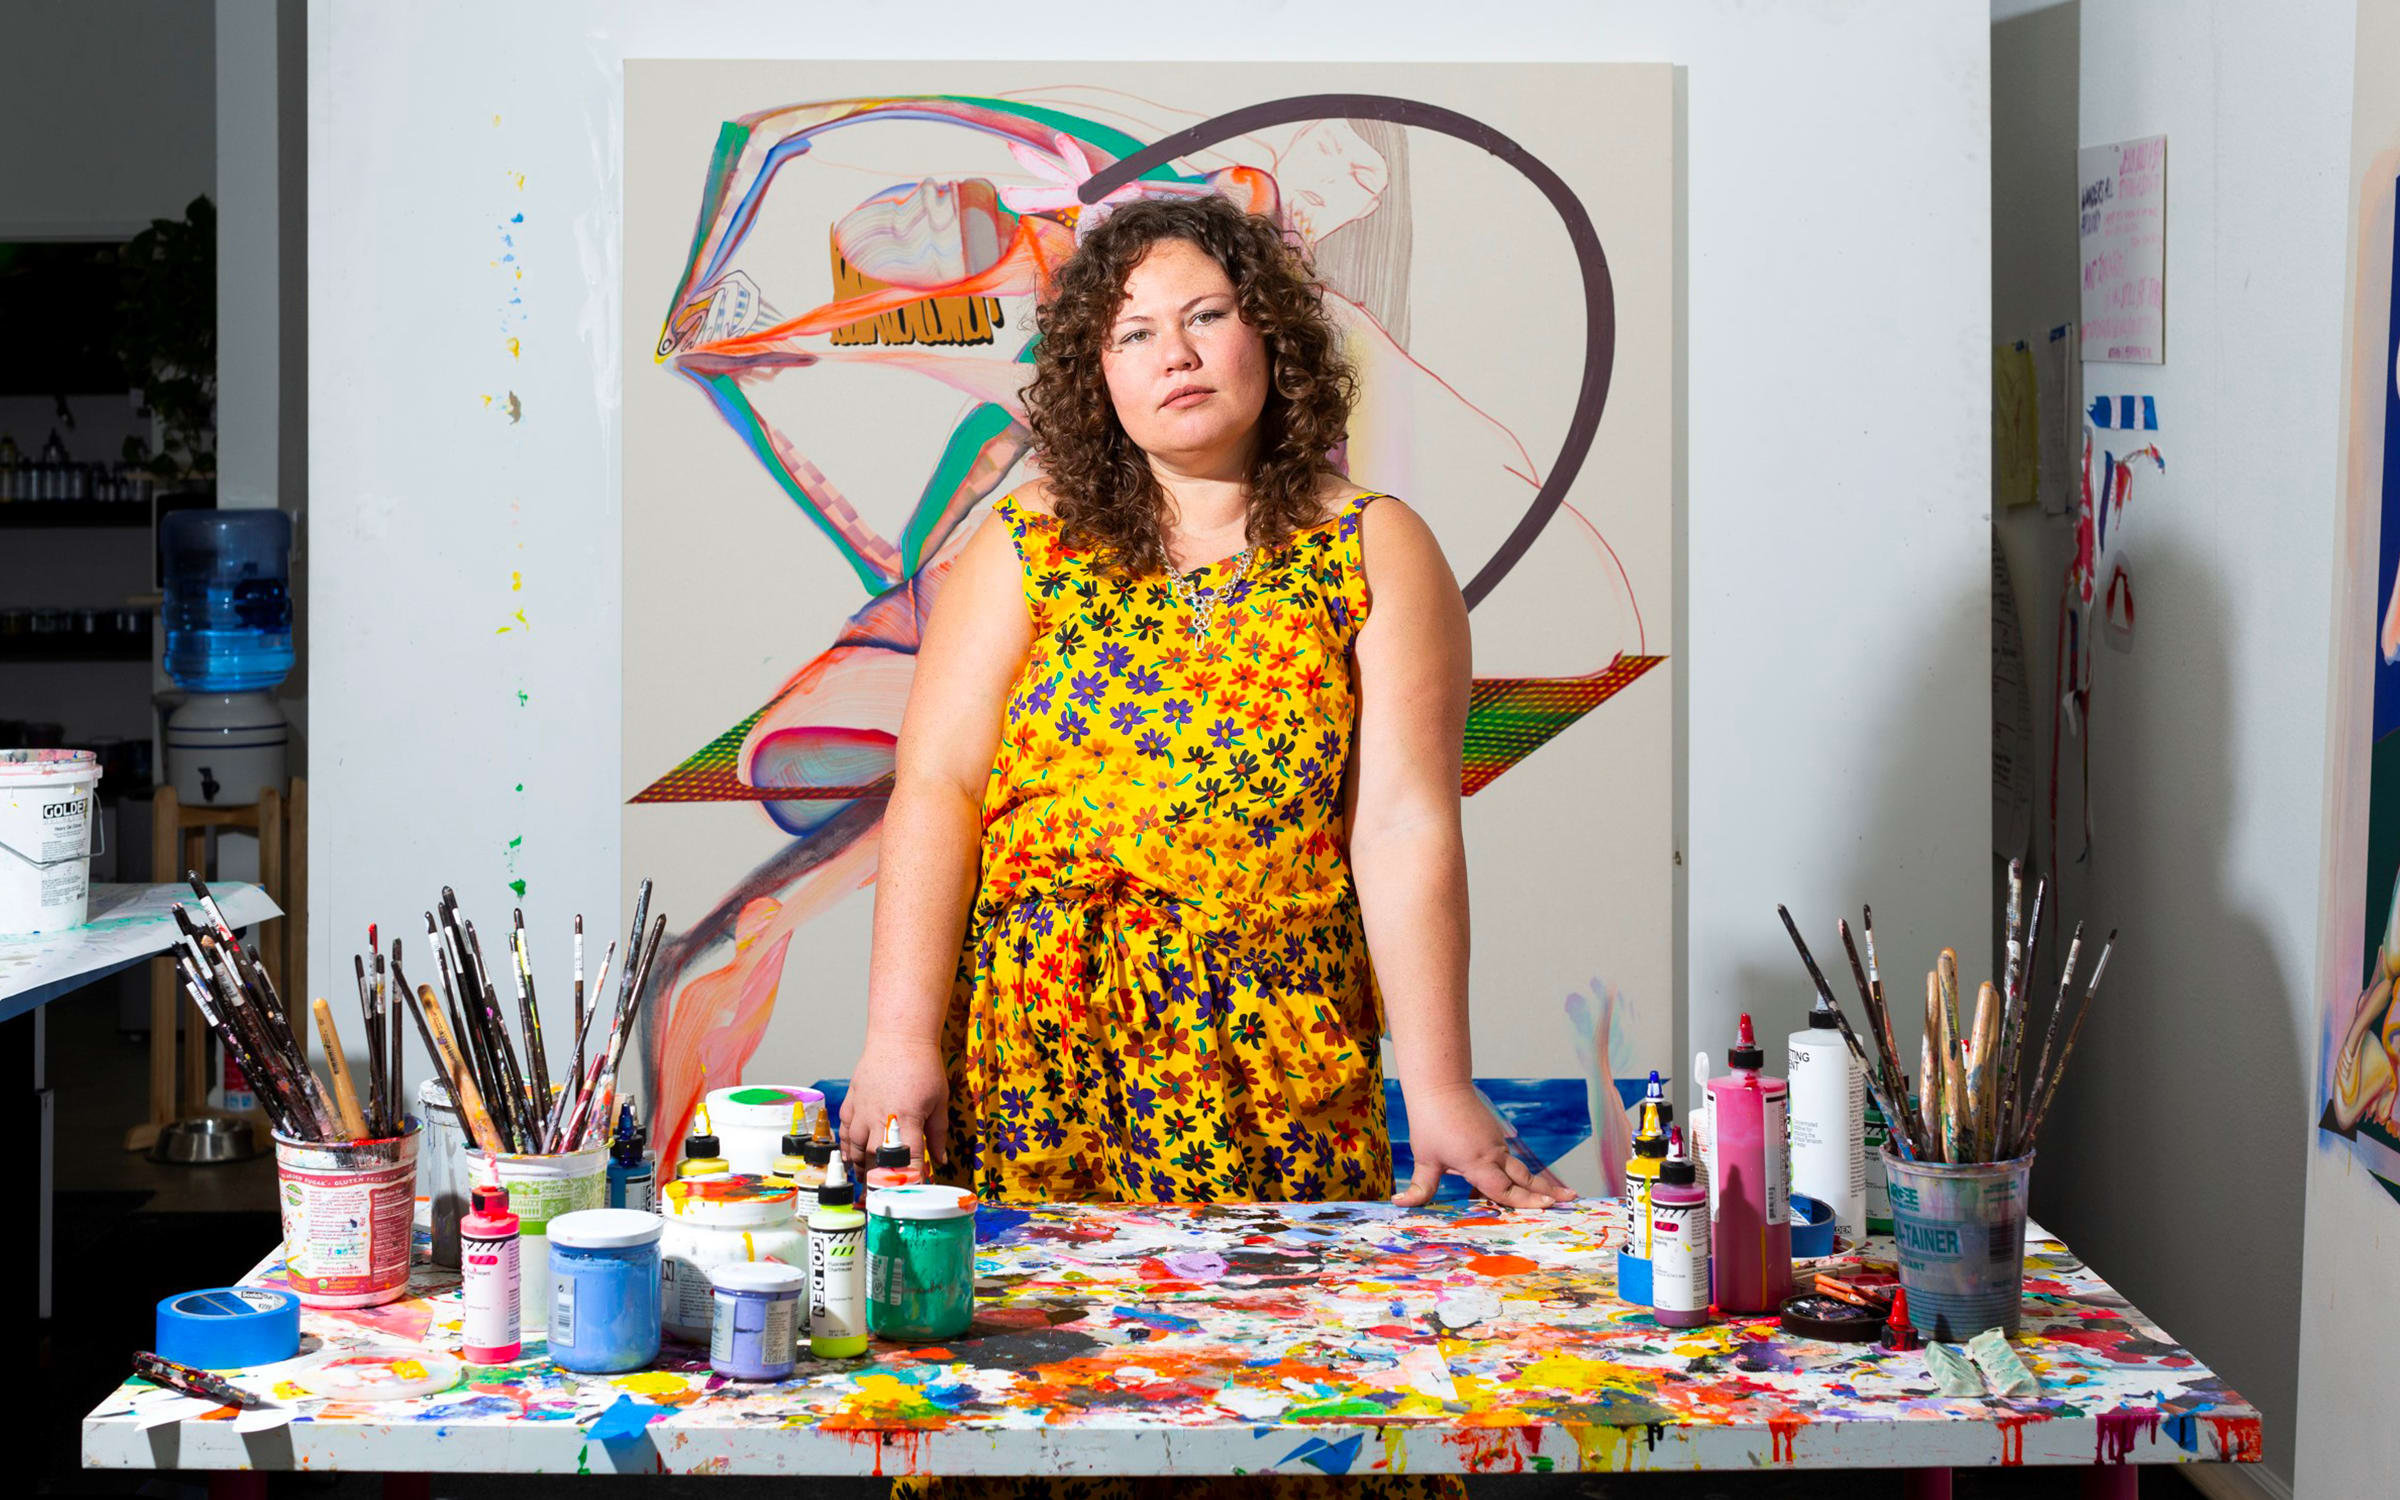 Christina Quarles in her studio. Photograph by Iona Szwarc, 2021.